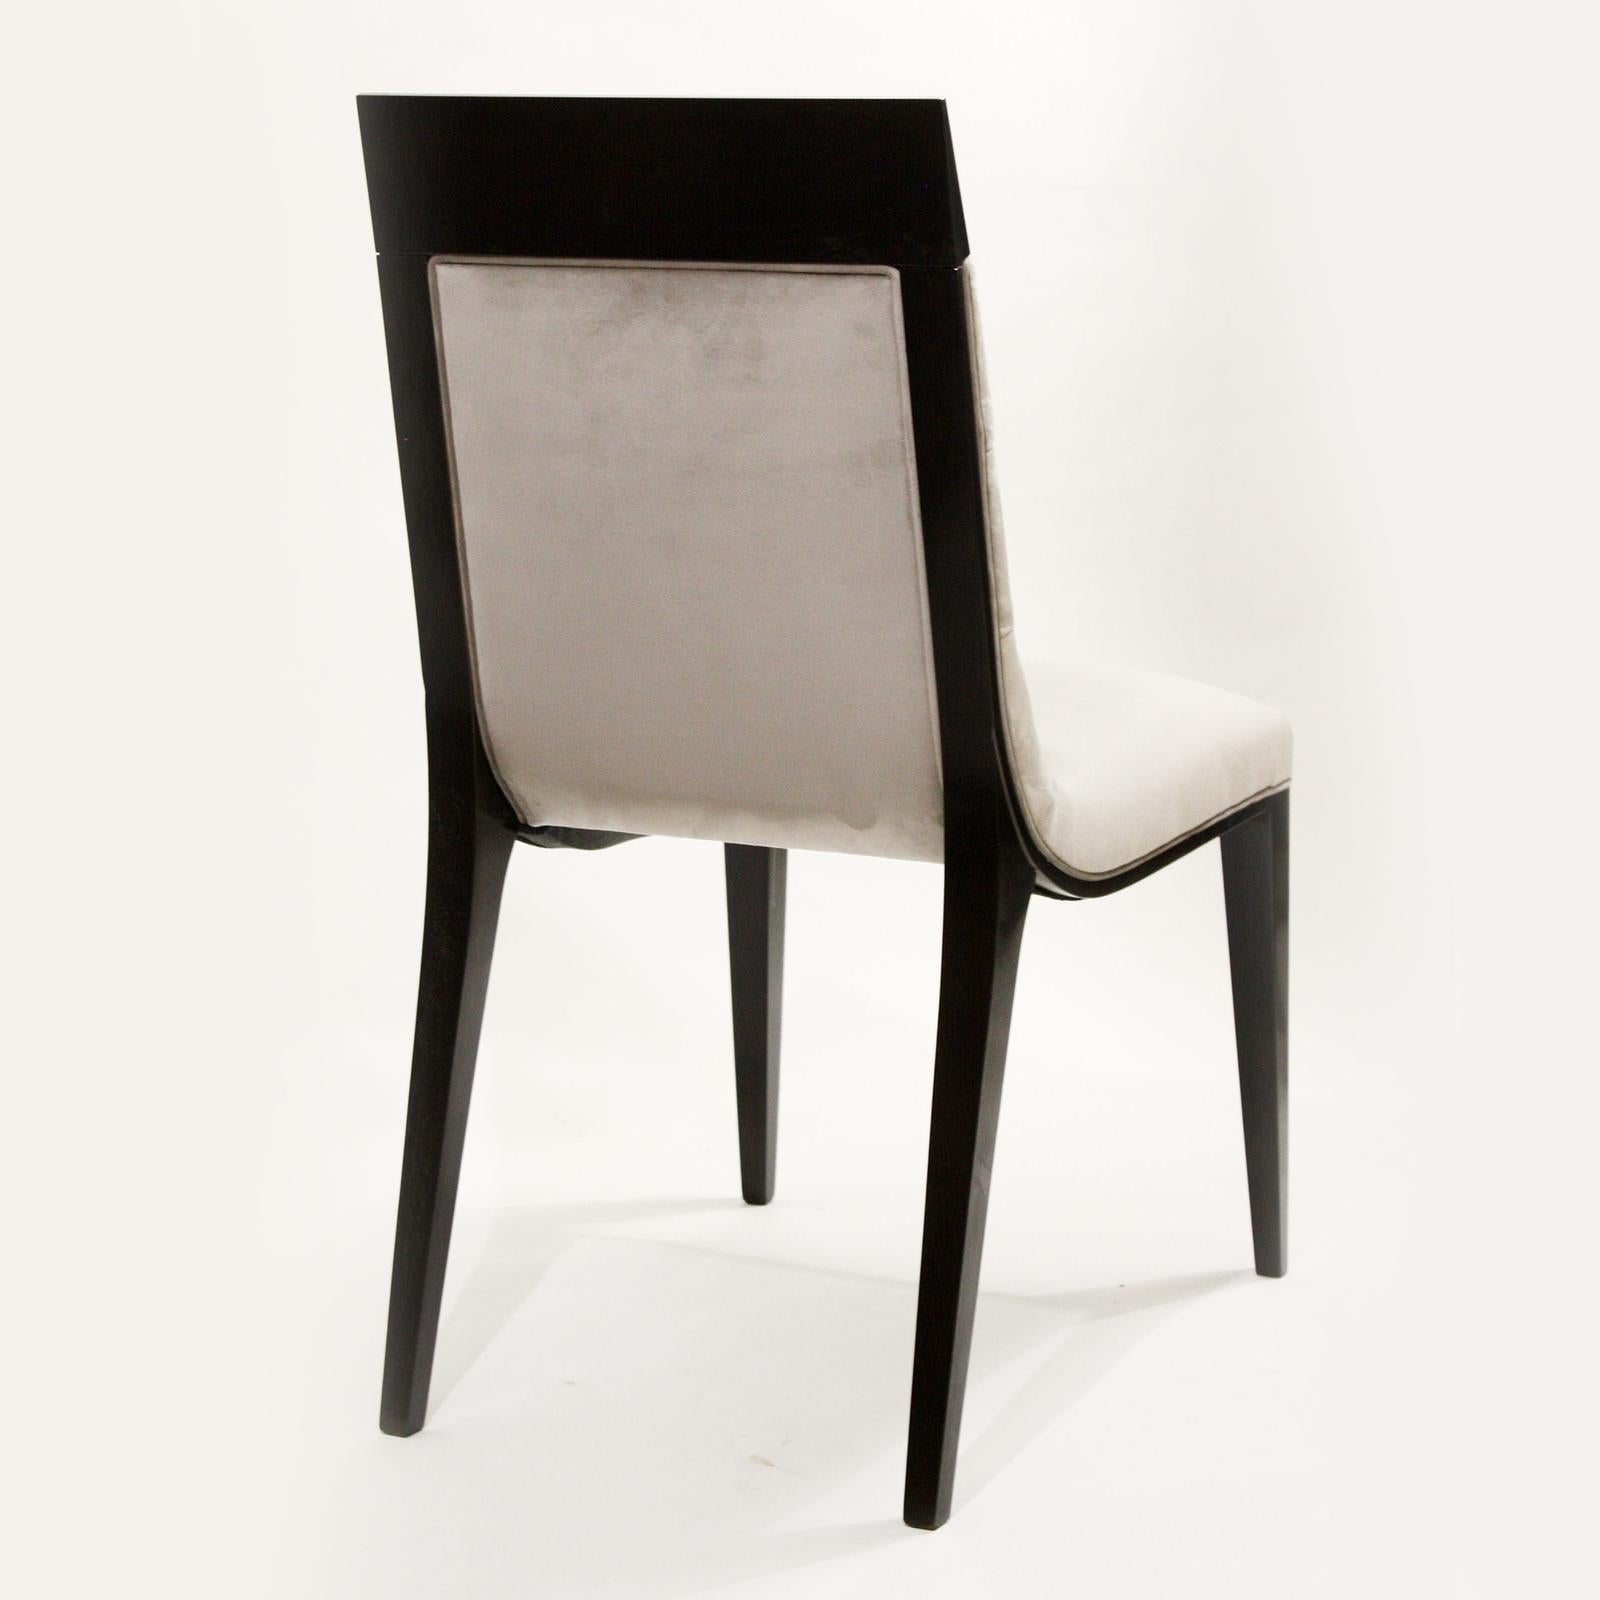 A fabulous and contemporary style characterize this Oscar collection chair with a splendid padded design on the high back. A delightful addition to any decor with an elegant and cosmopolitan flavor, the chair combines tradition and modernity with